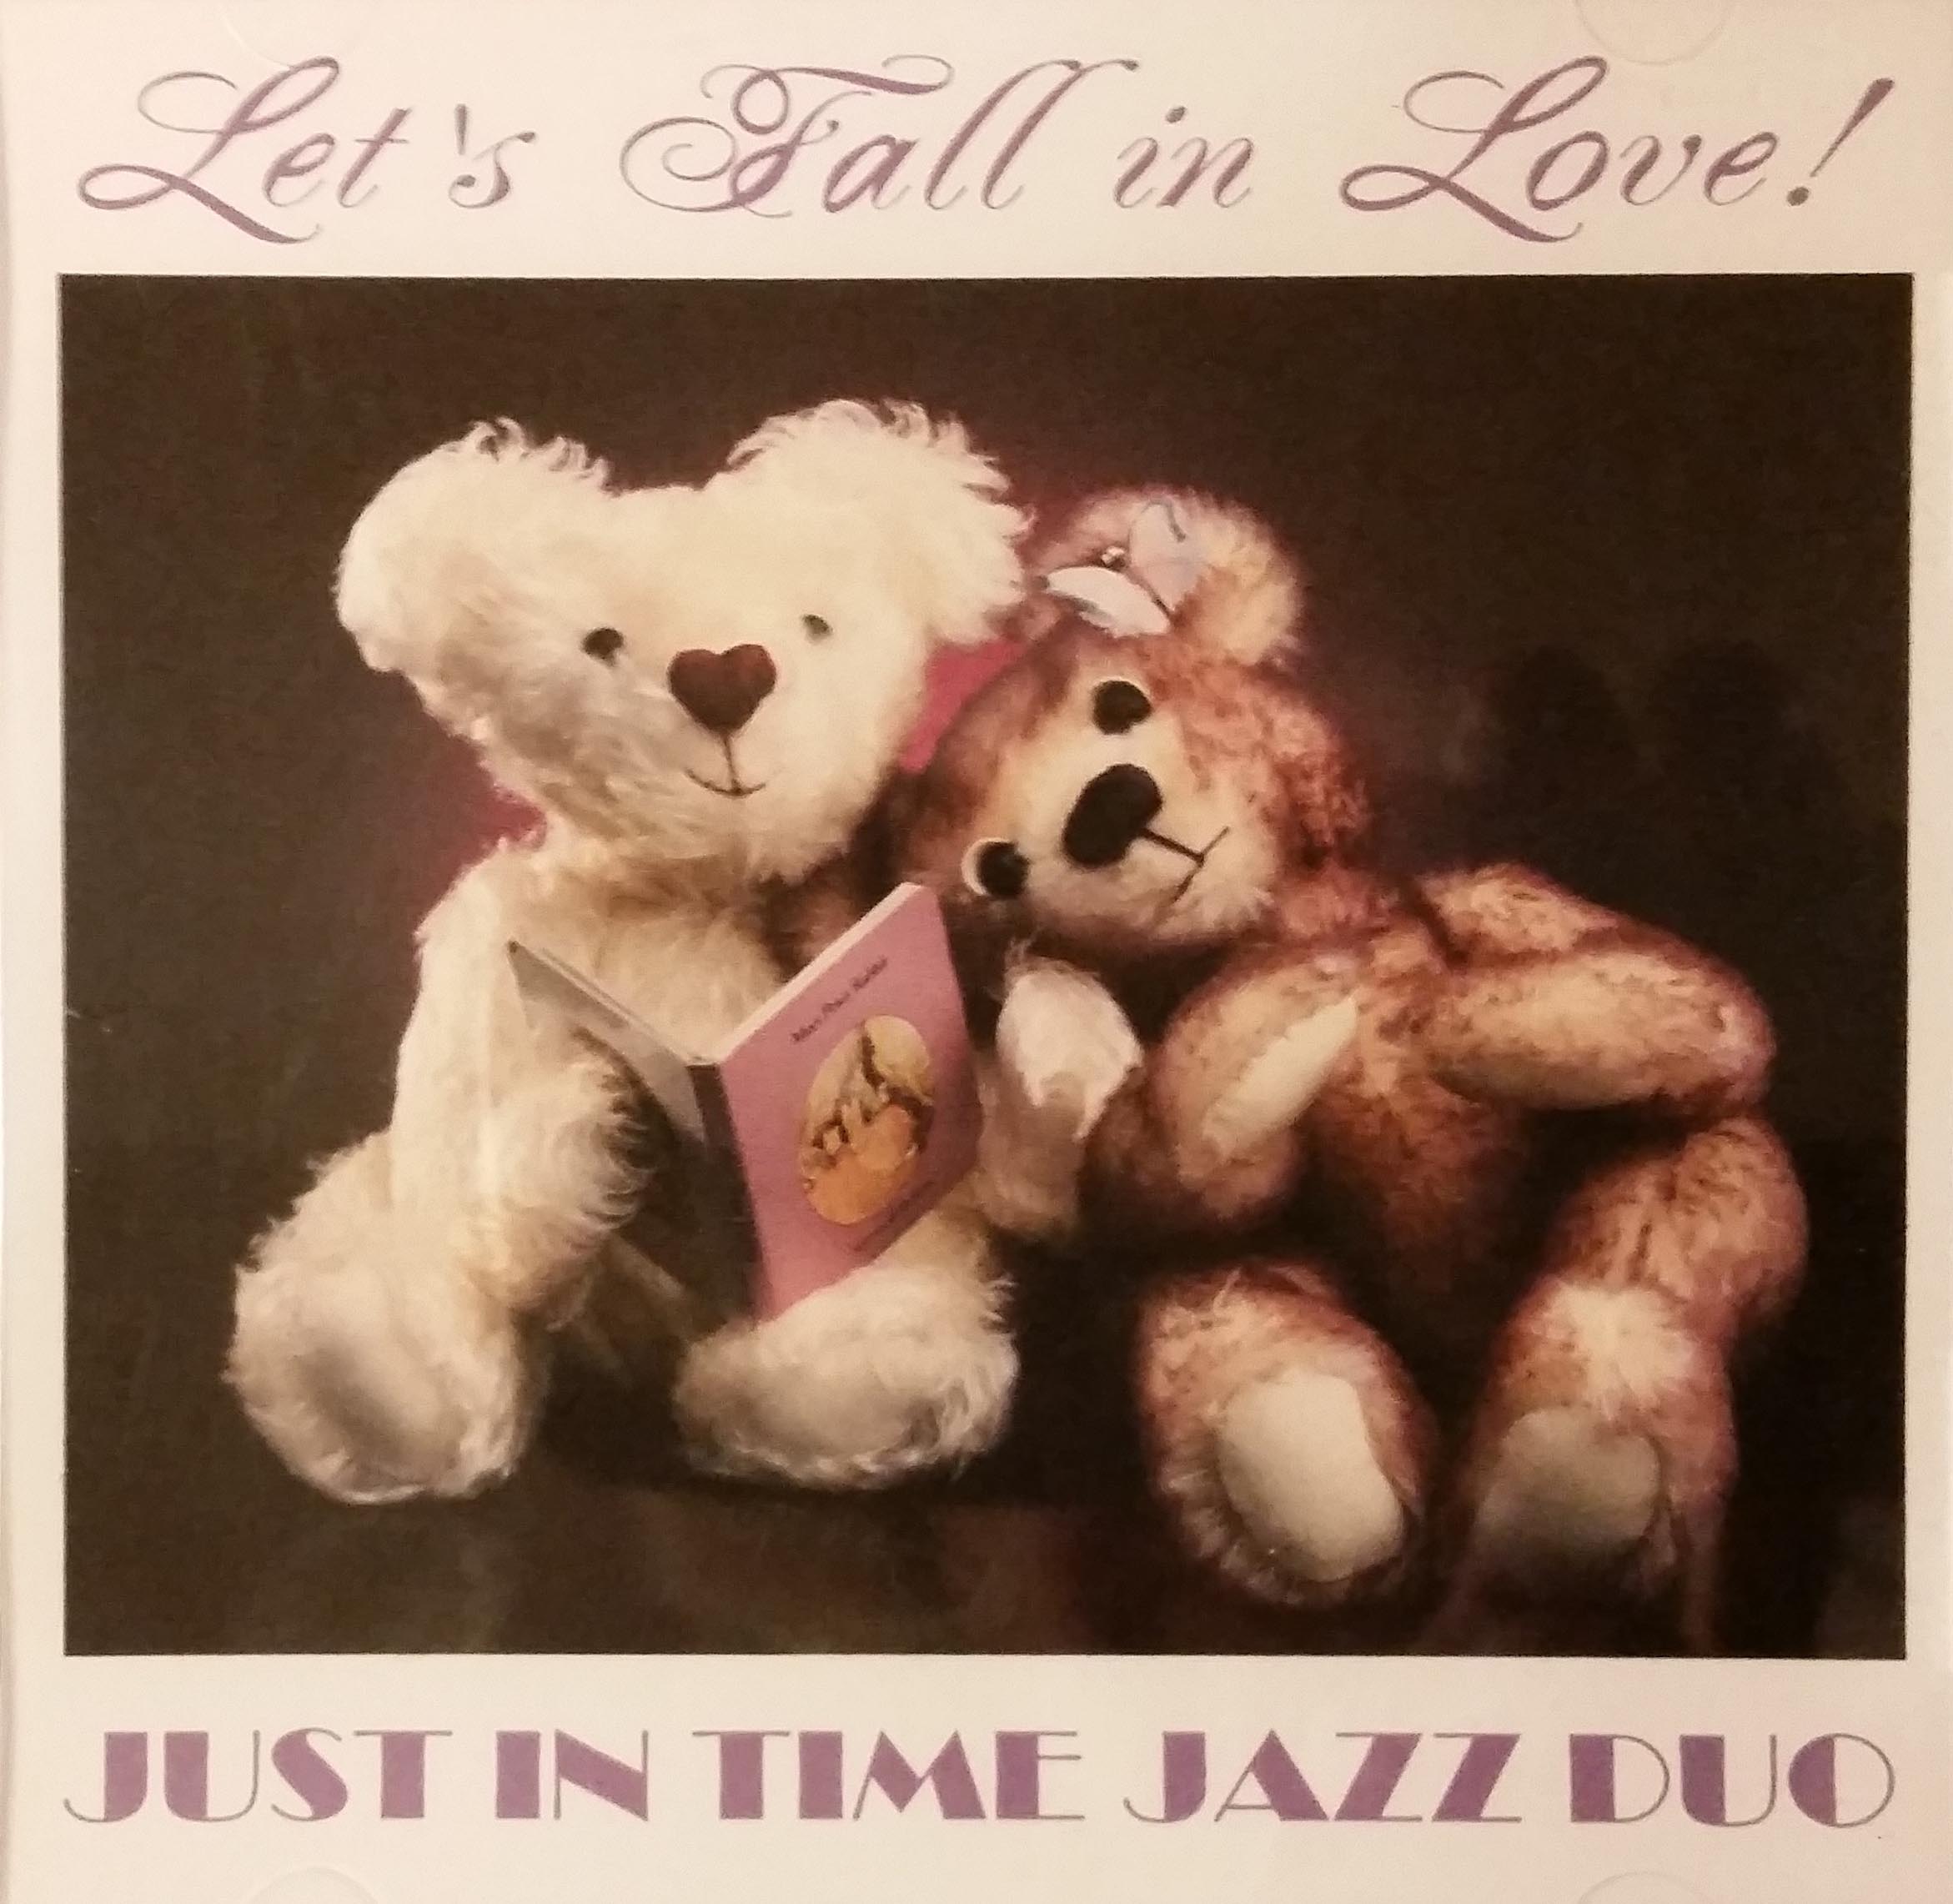 Let's Fall in Love Cover Art - two teddy bears snuggling